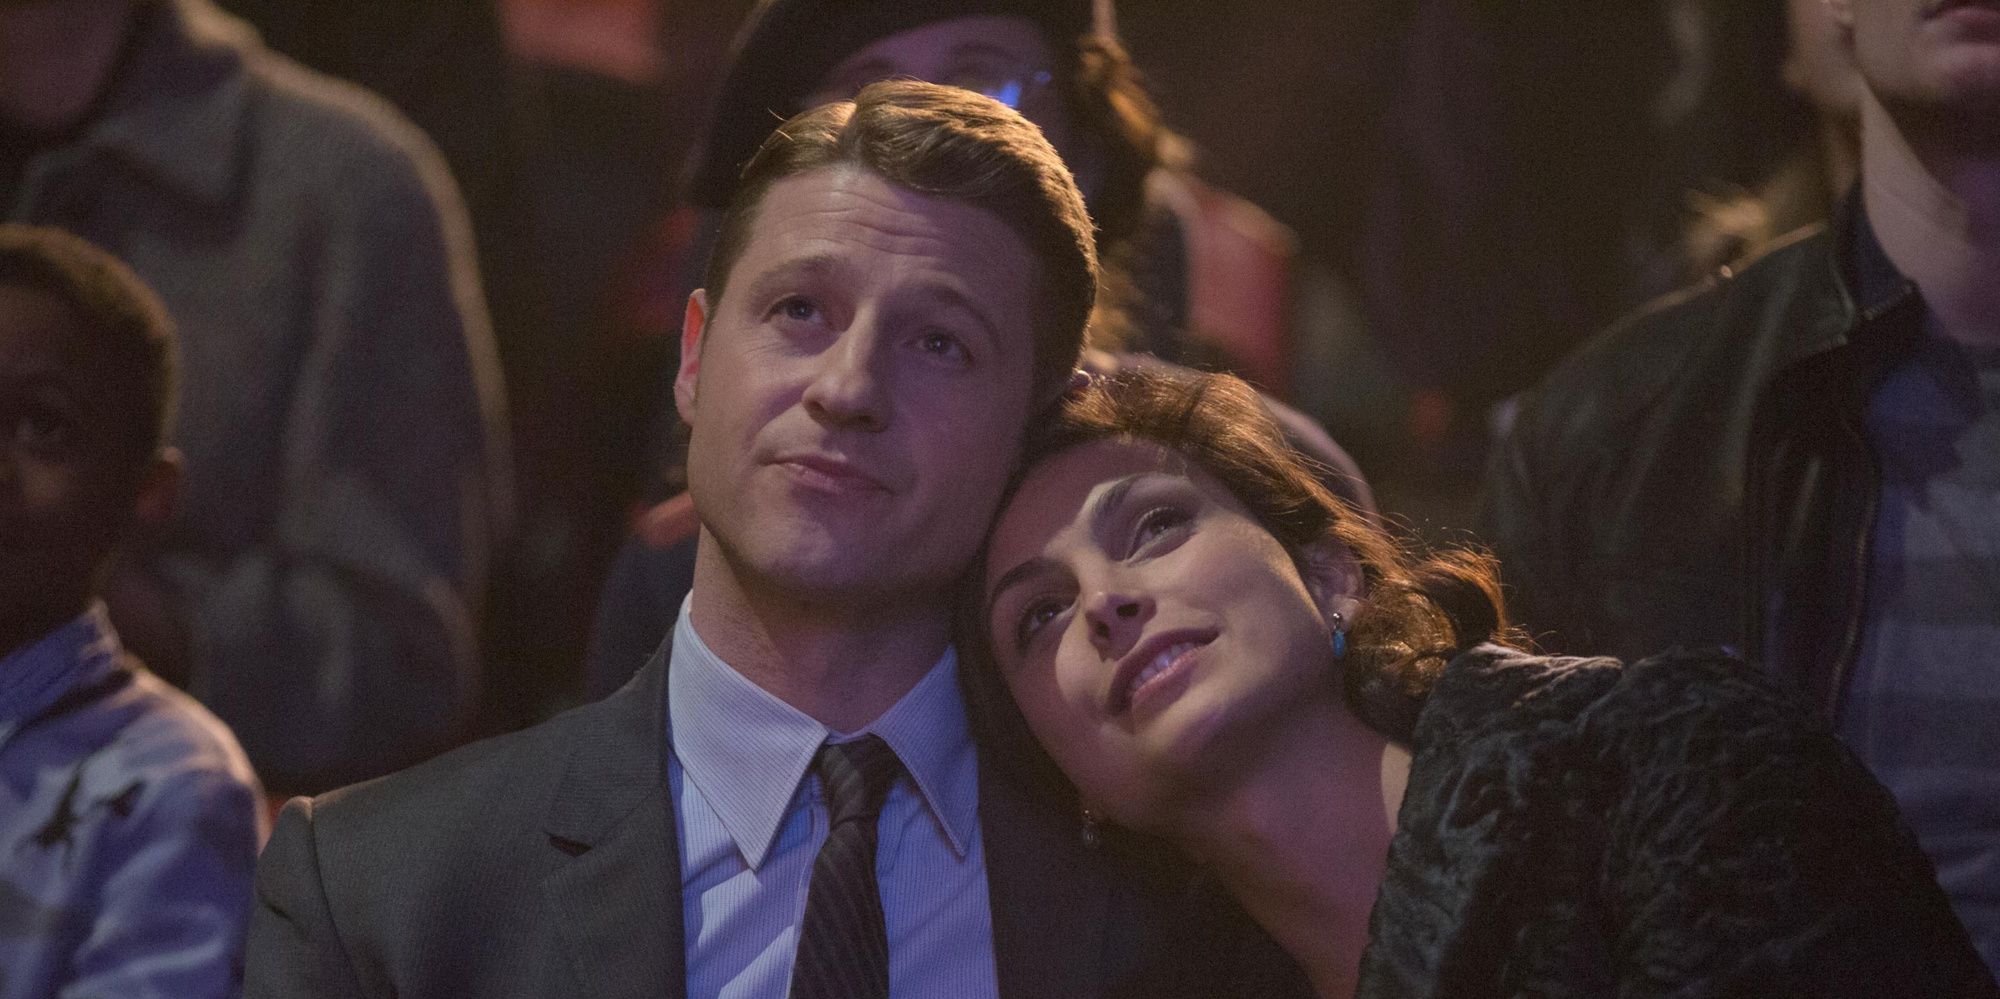 Gotham's Jim Gordon and Leslie Thompkins Just Got Married - Now What?